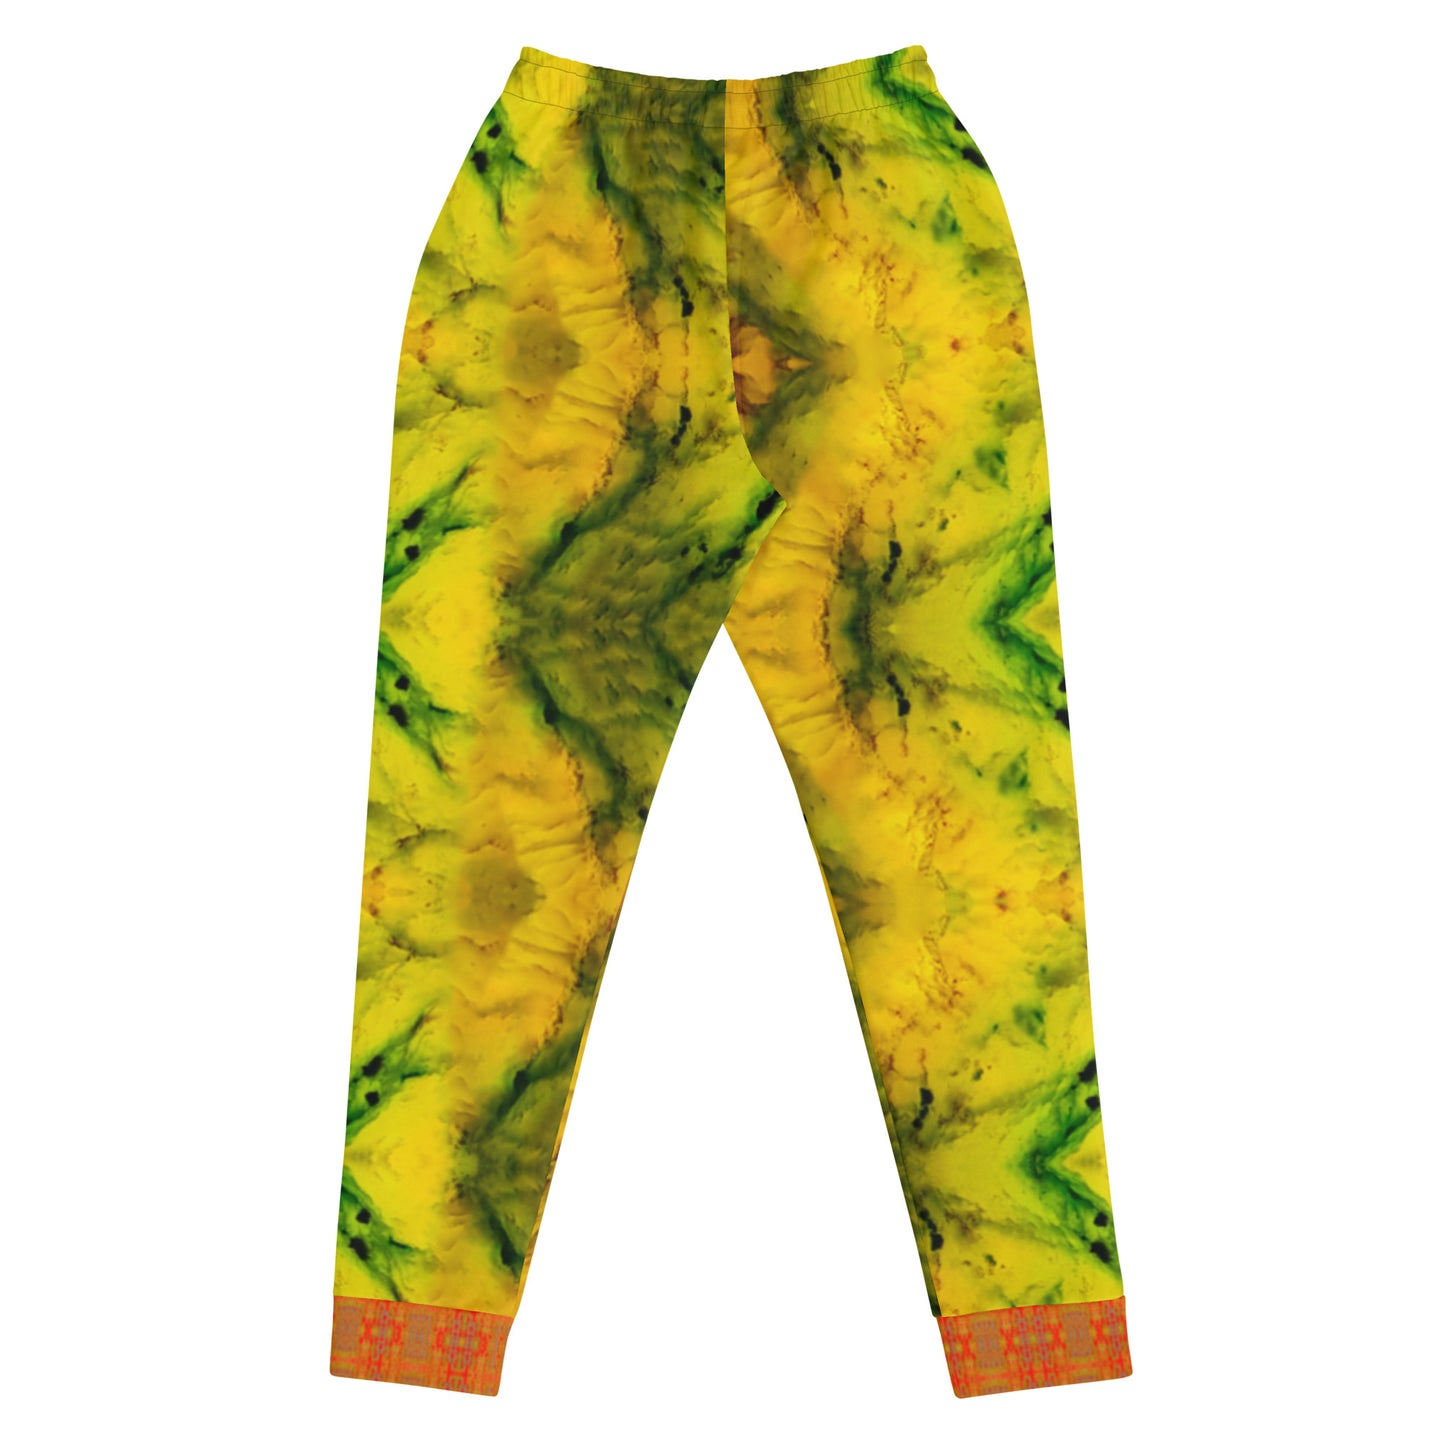 Joggers (Her/They) RJSTH@Fabric#1 RJSTHW2022 RJS